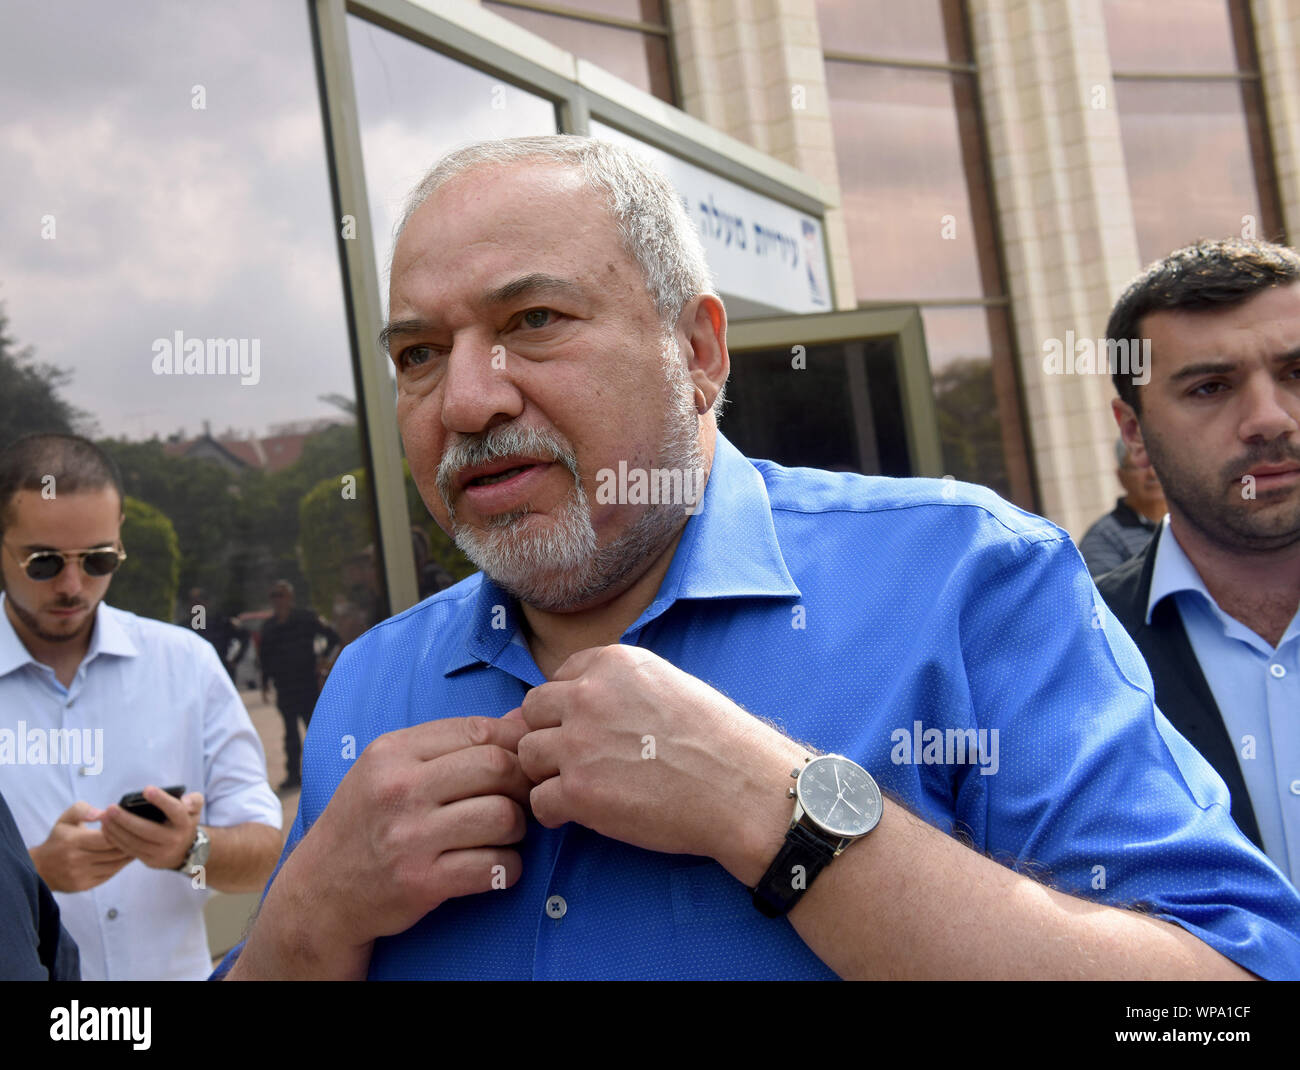 Maale Adumim Settlement, West Bank. 08th Sep, 2019. Israeli former defense minister and head of the Yisrael Beiteinu Party, Avigdor Lieberman, prepares to make a statement to the press during a campaign stop in the Maale Adumim settlement in the West Bank, on Sunday, September 8, 2019. Lieberman promised sovereignty for Maale Adumim, the third largest West Bank settlement. Israelis return to the polls on September 17, for the second national election in 2019. Photo by Debbie Hill/UPI Credit: UPI/Alamy Live News Stock Photo